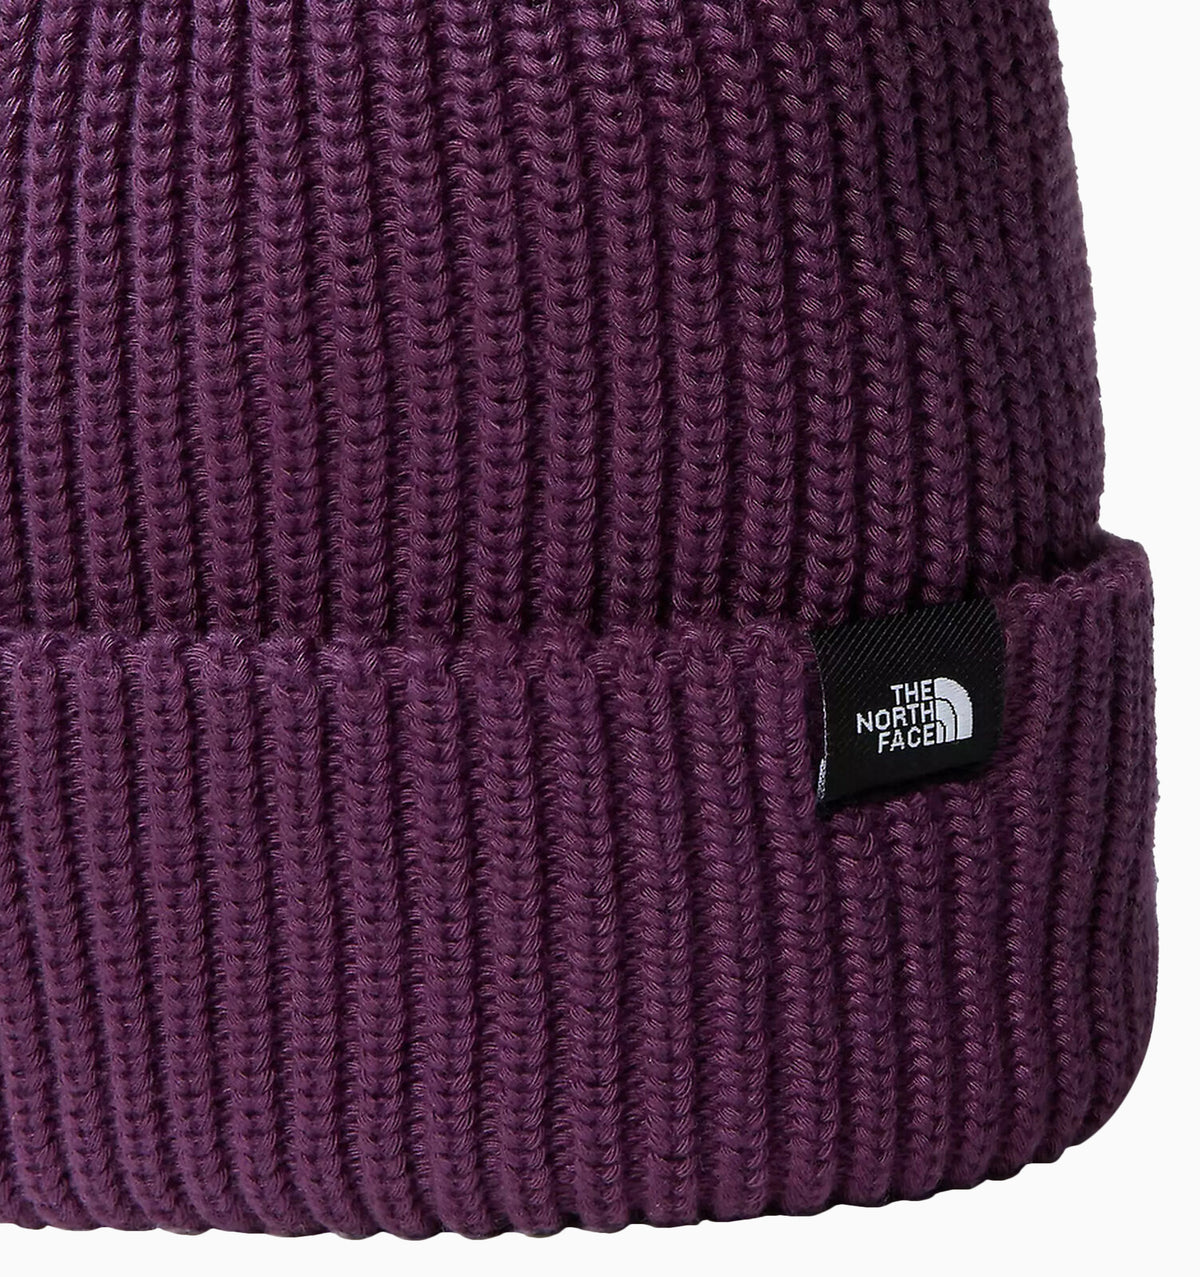 The North Face Fisherman Beanie - Black Currant Purple